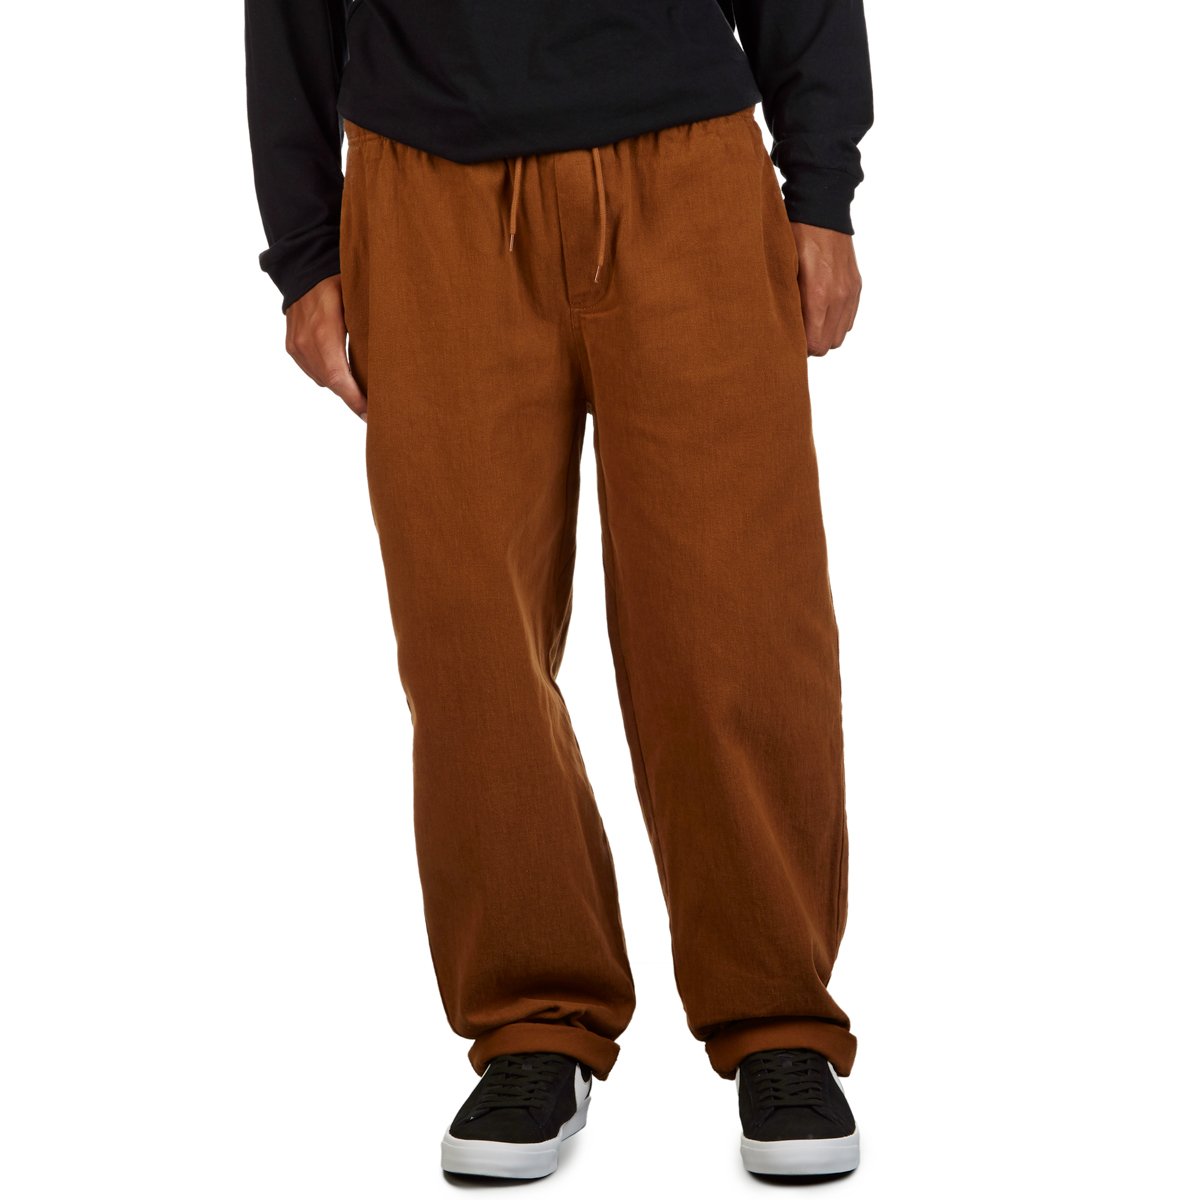 CCS Easy Twill Pants - Duck Brown image 4